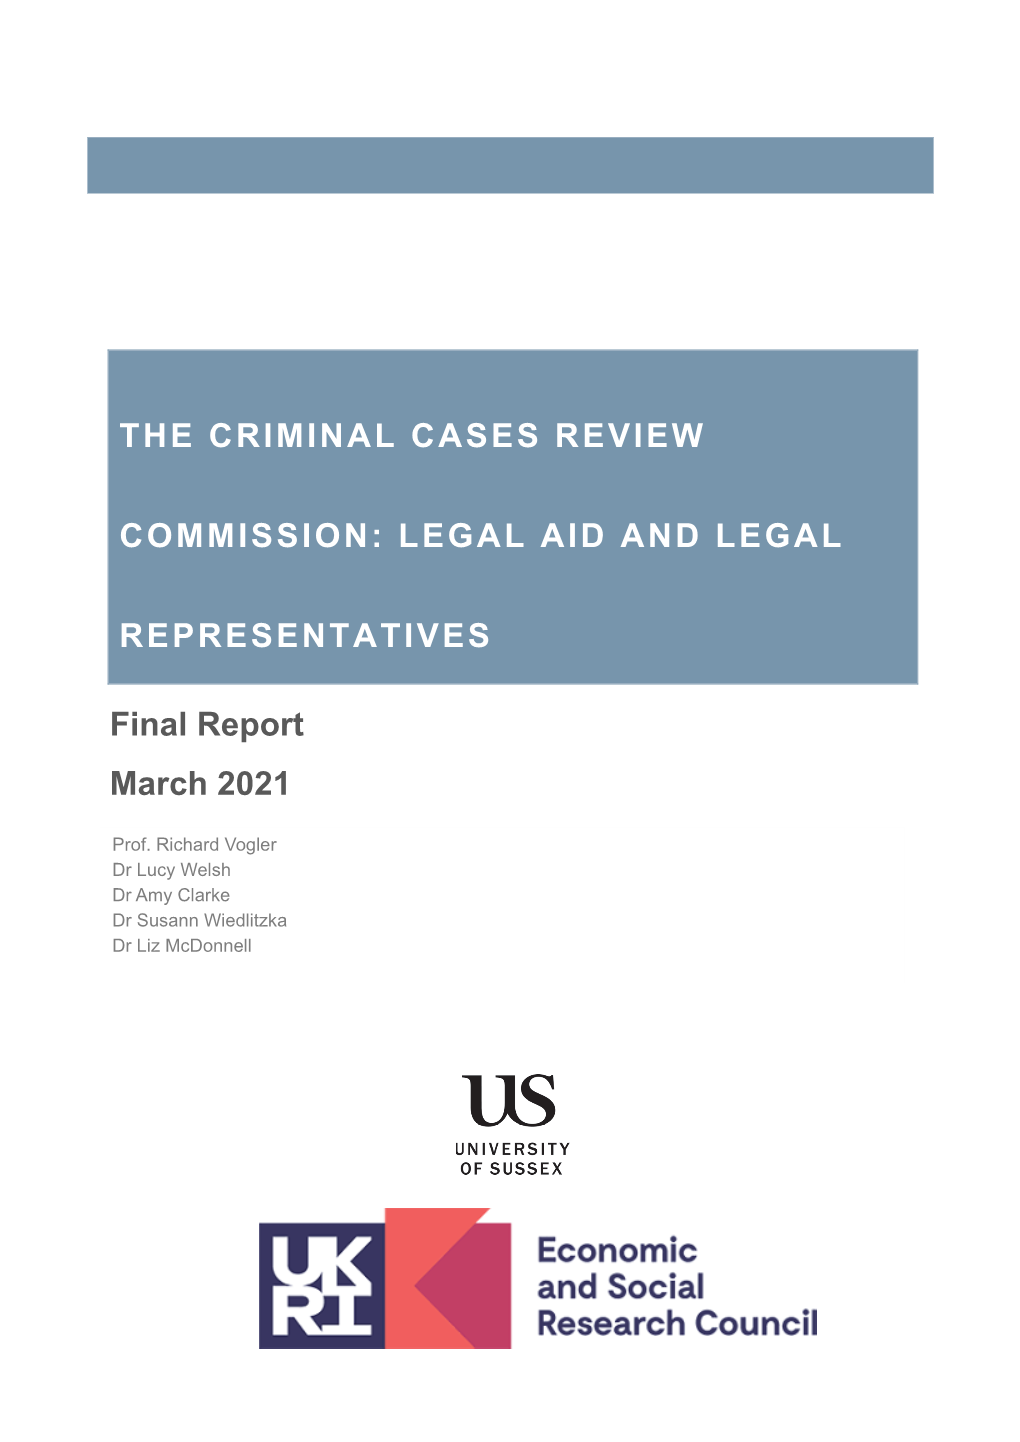 The Criminal Cases Review Commission: Legal Aid And